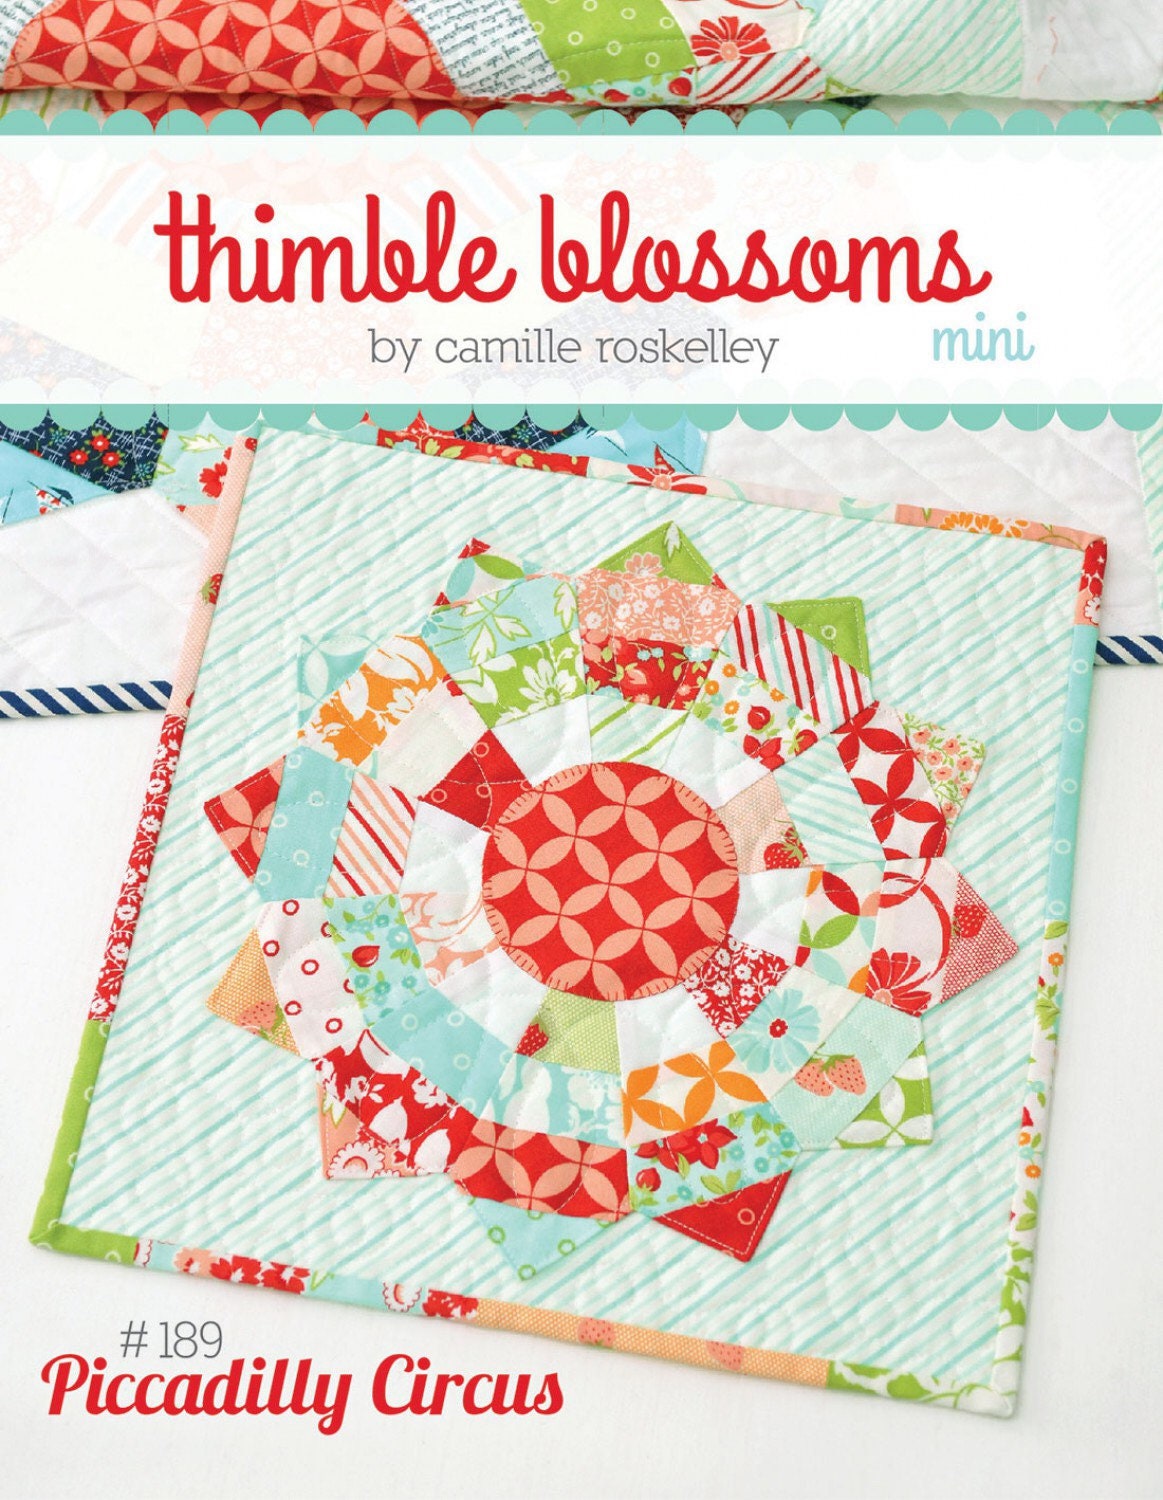 Piccadilly Circus Mini Quilt Pattern - Thimble Blossoms - Charm Pack Friendly - 12” x 12”